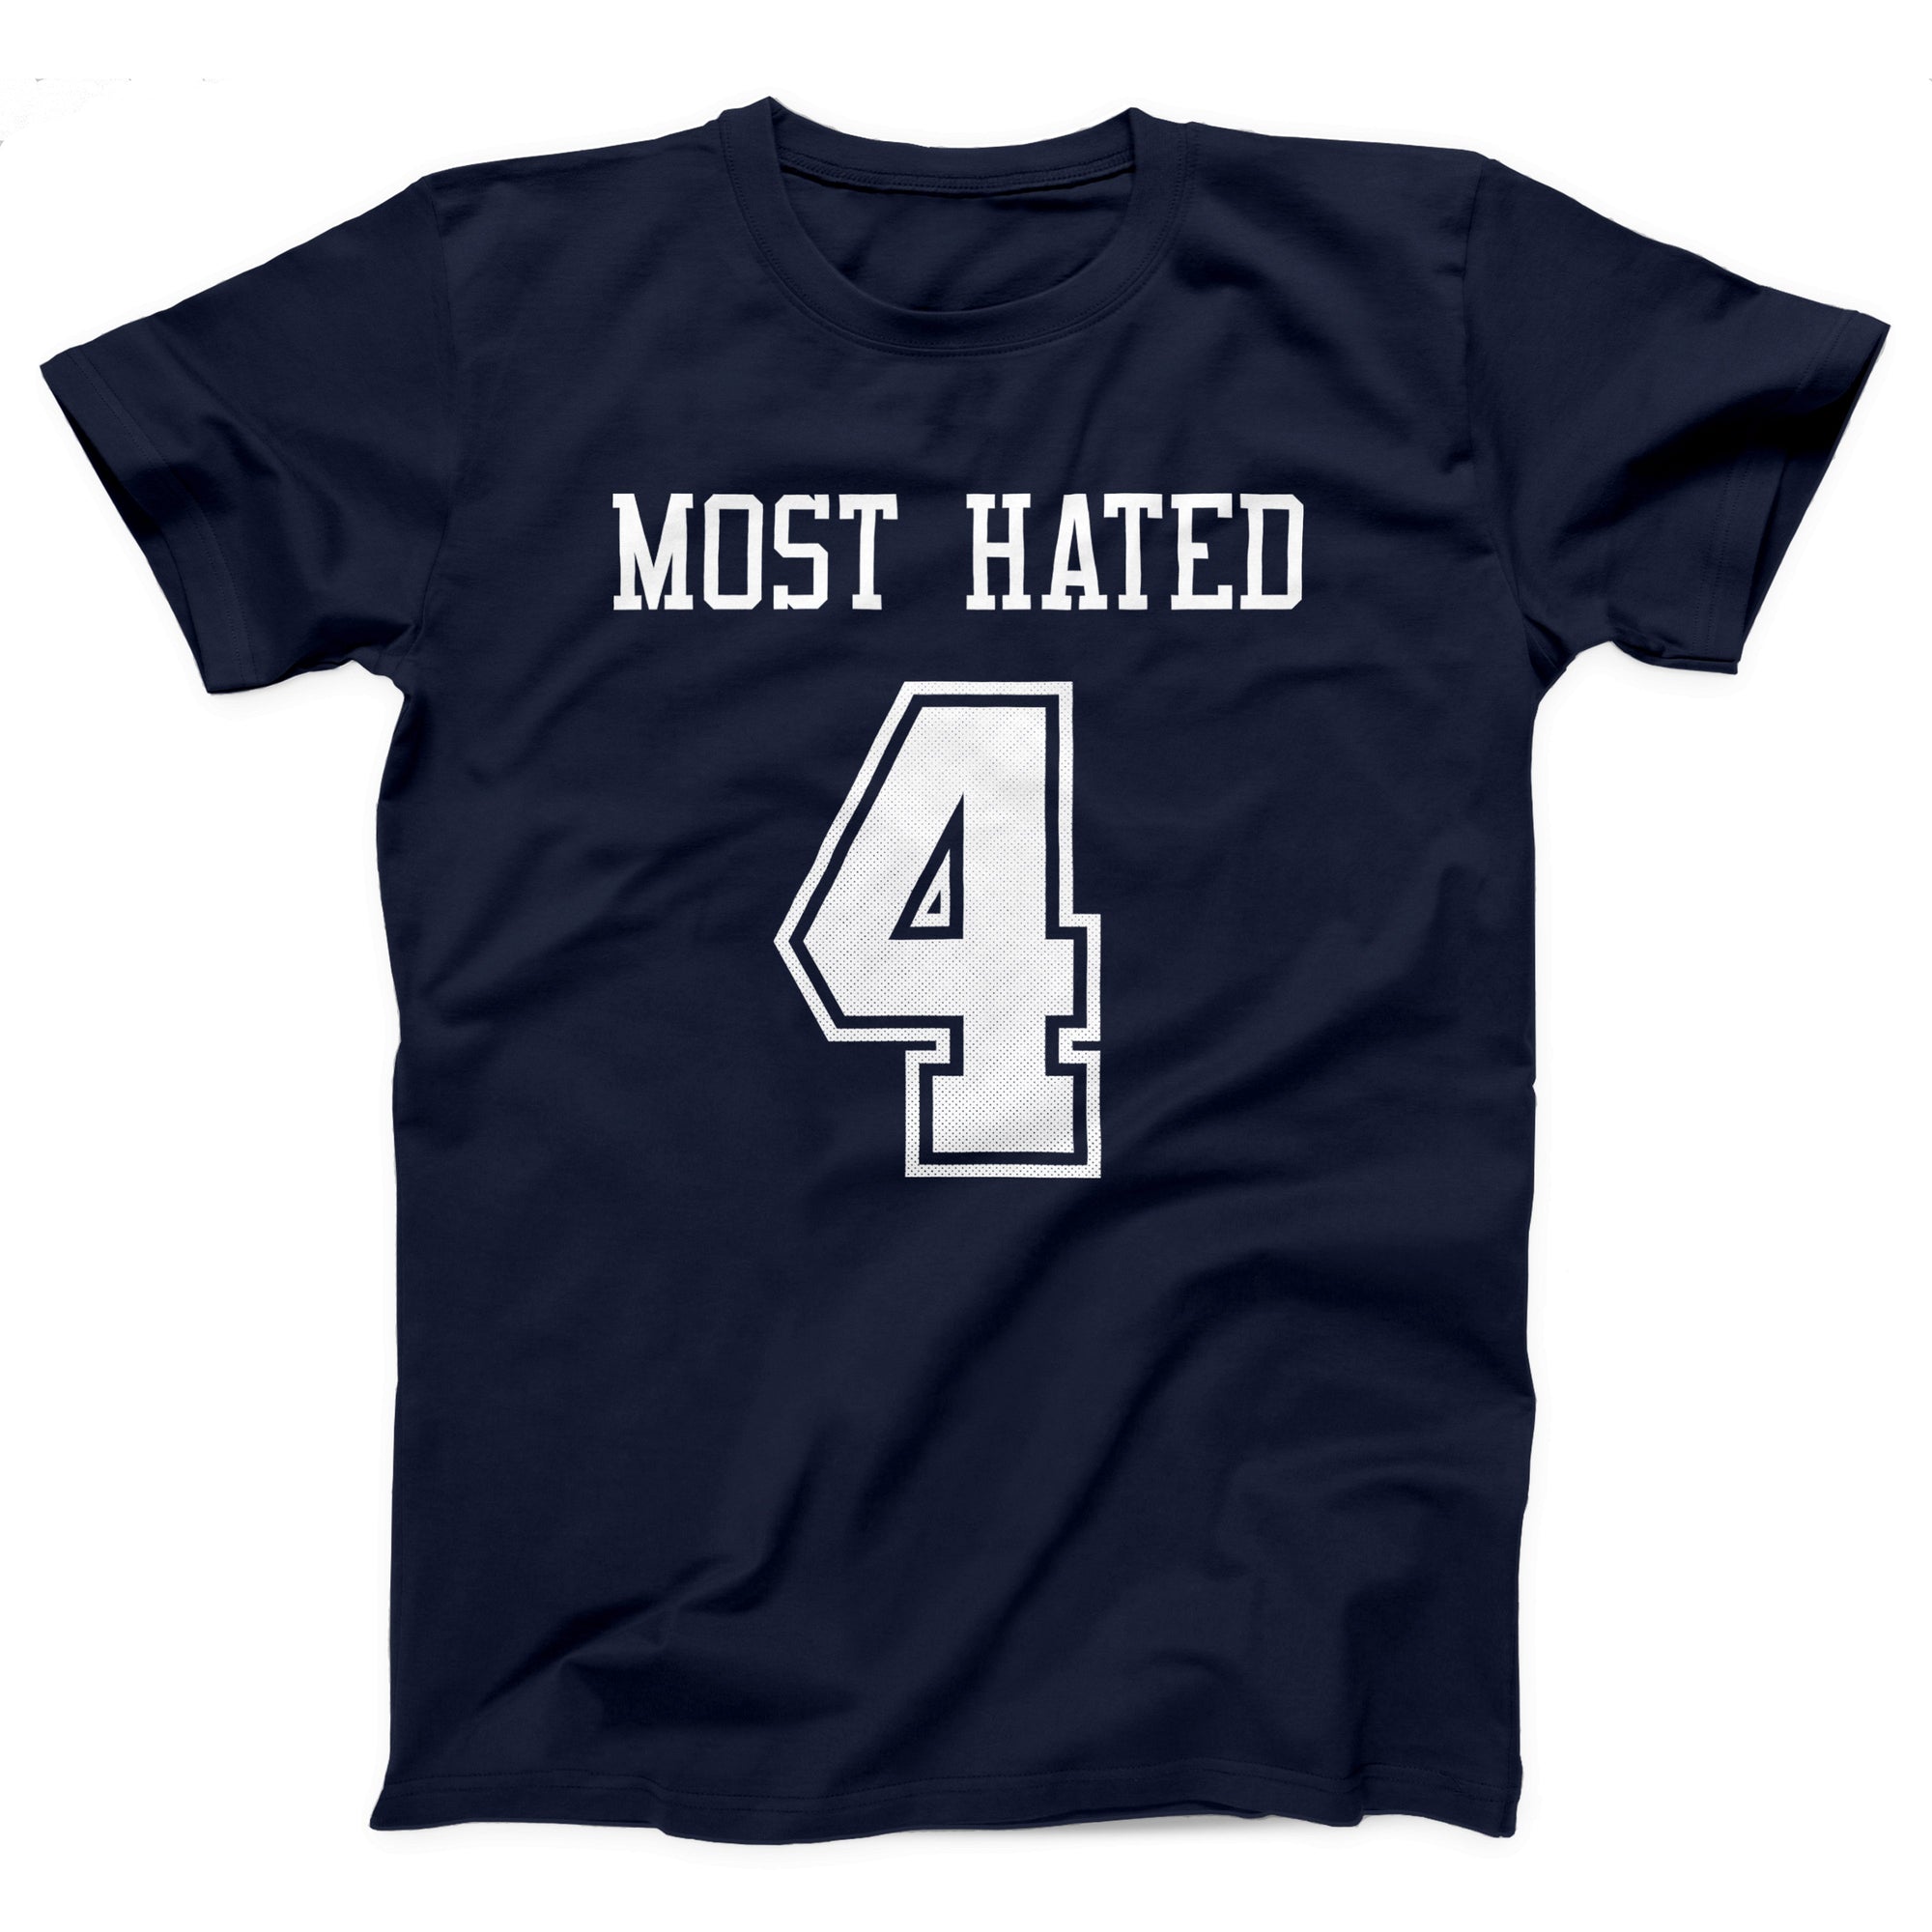 Most Hated Adult Unisex T-Shirt - Twisted Gorilla